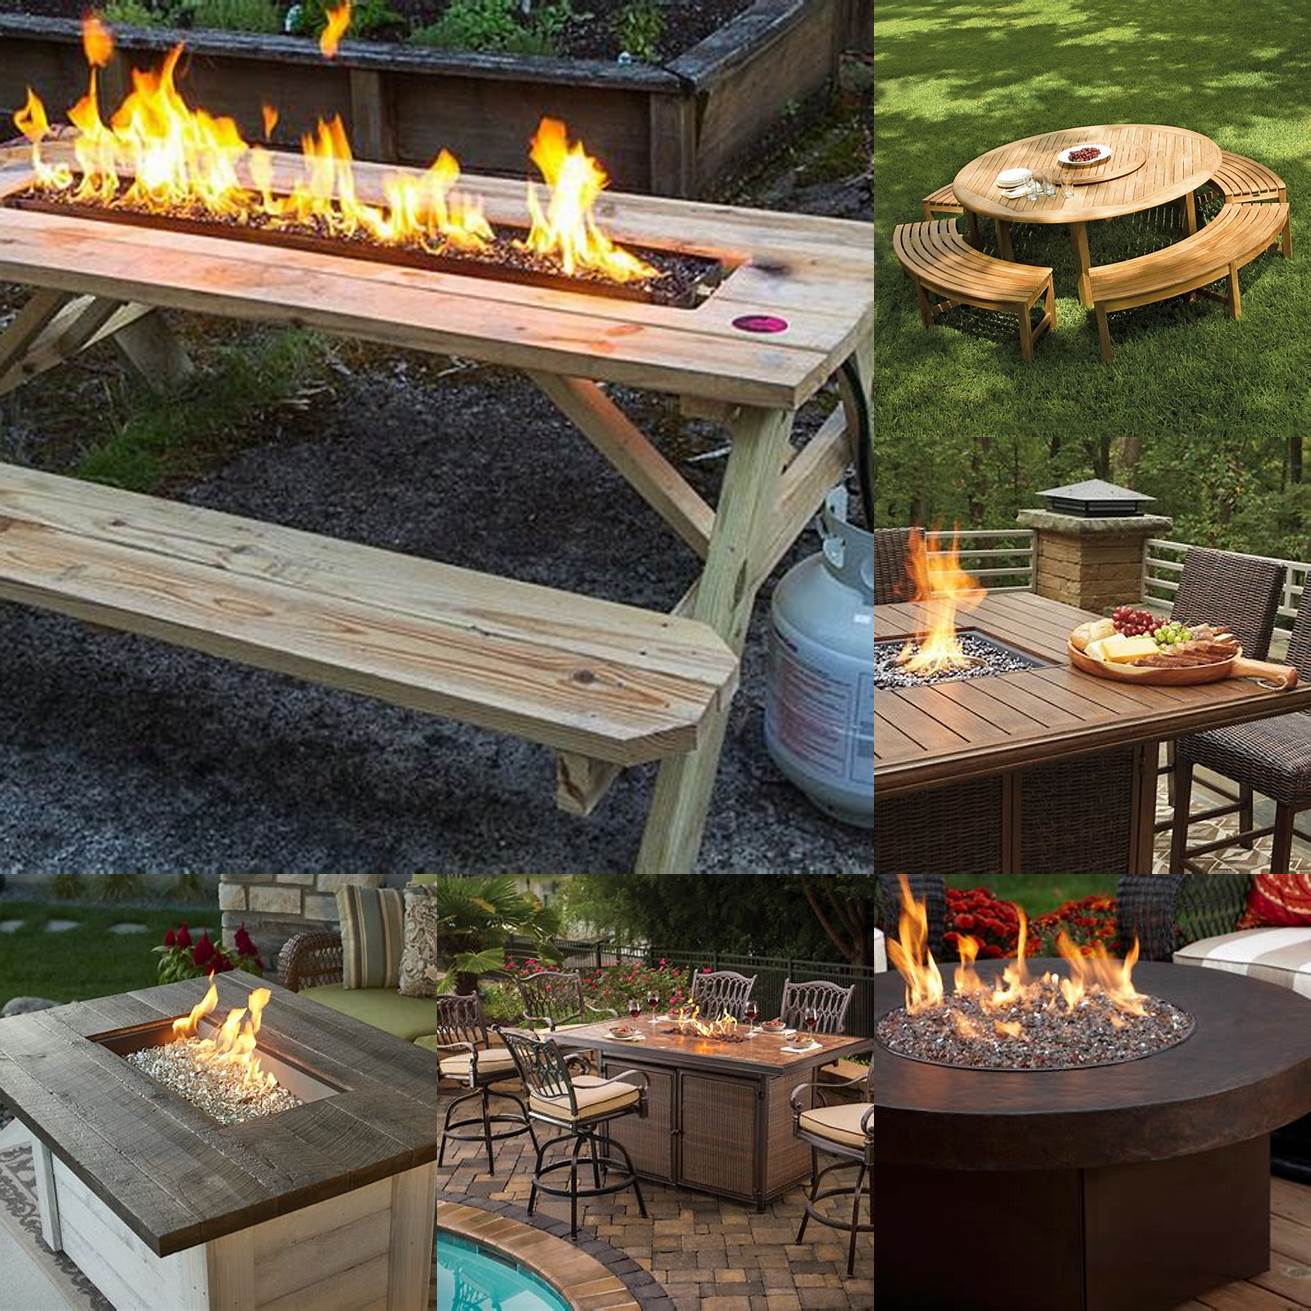 Teak Picnic Table with a Fire Pit